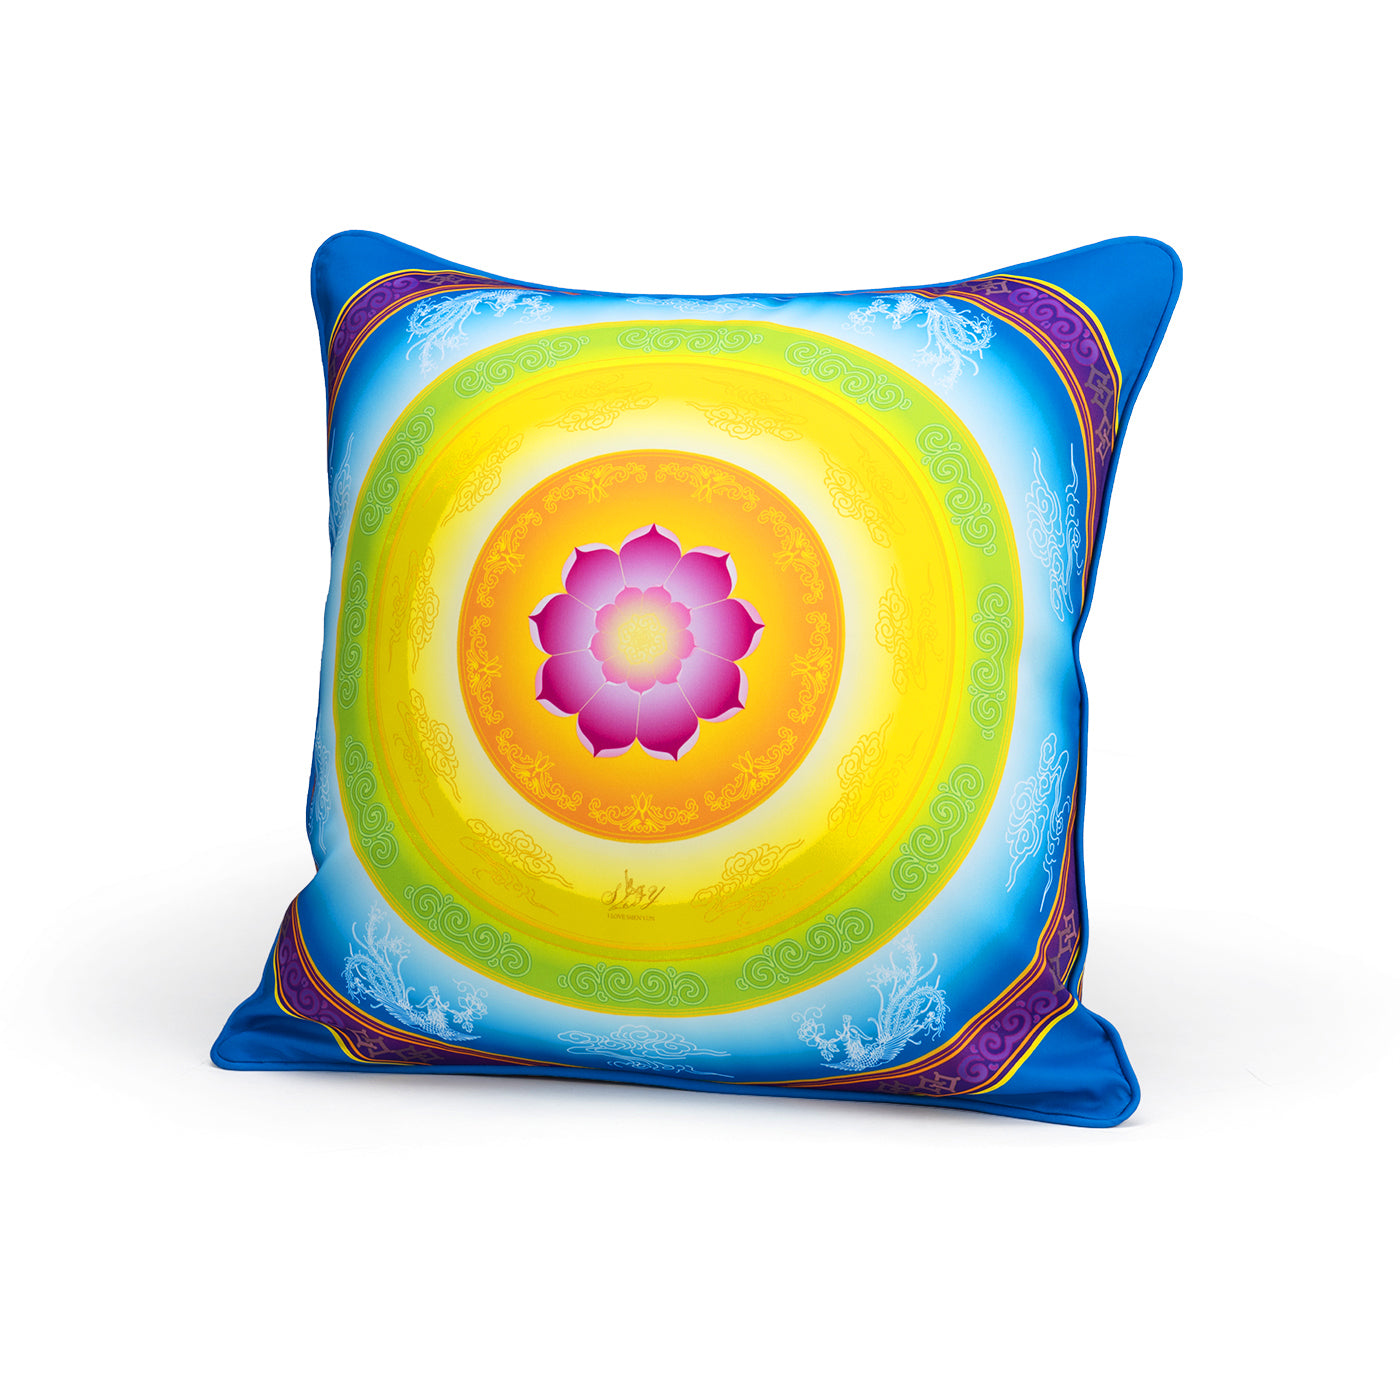 Elegance of the Yi Cushion Cover Image | Shen Yun Collections